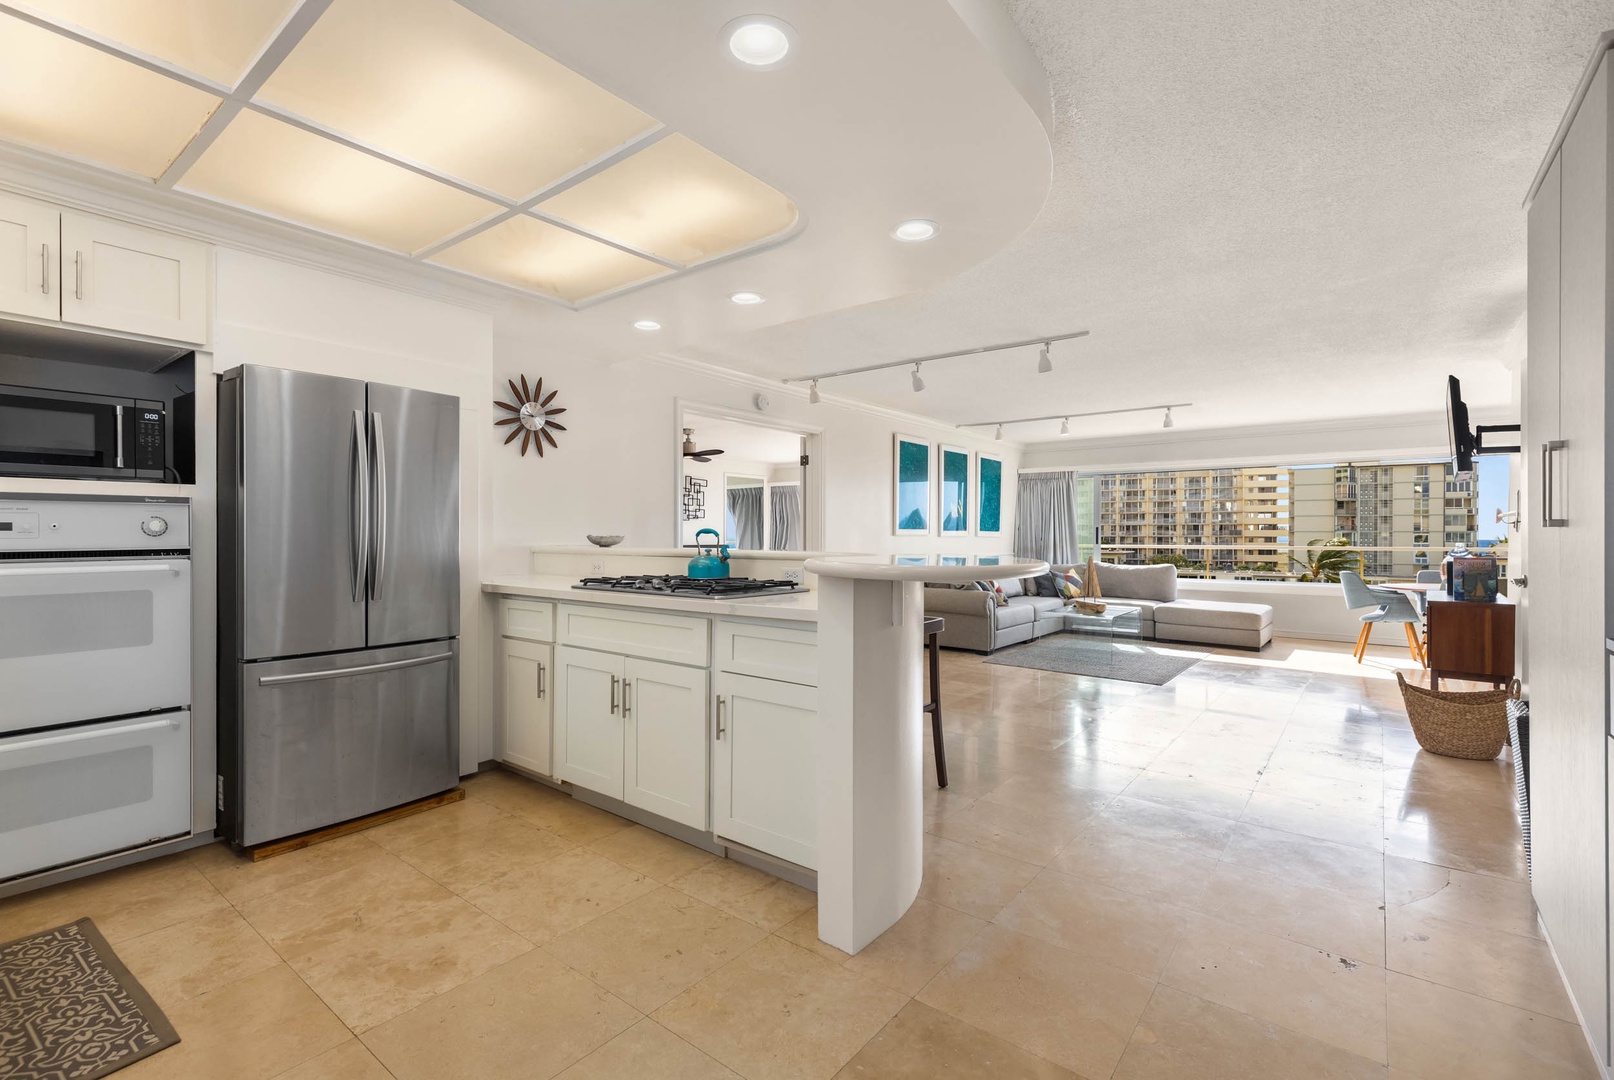 Honolulu Vacation Rentals, Colony Surf Getaway - Sleek, fully-equipped kitchen that opens up to a luxurious living space, perfect for entertaining or leisure.